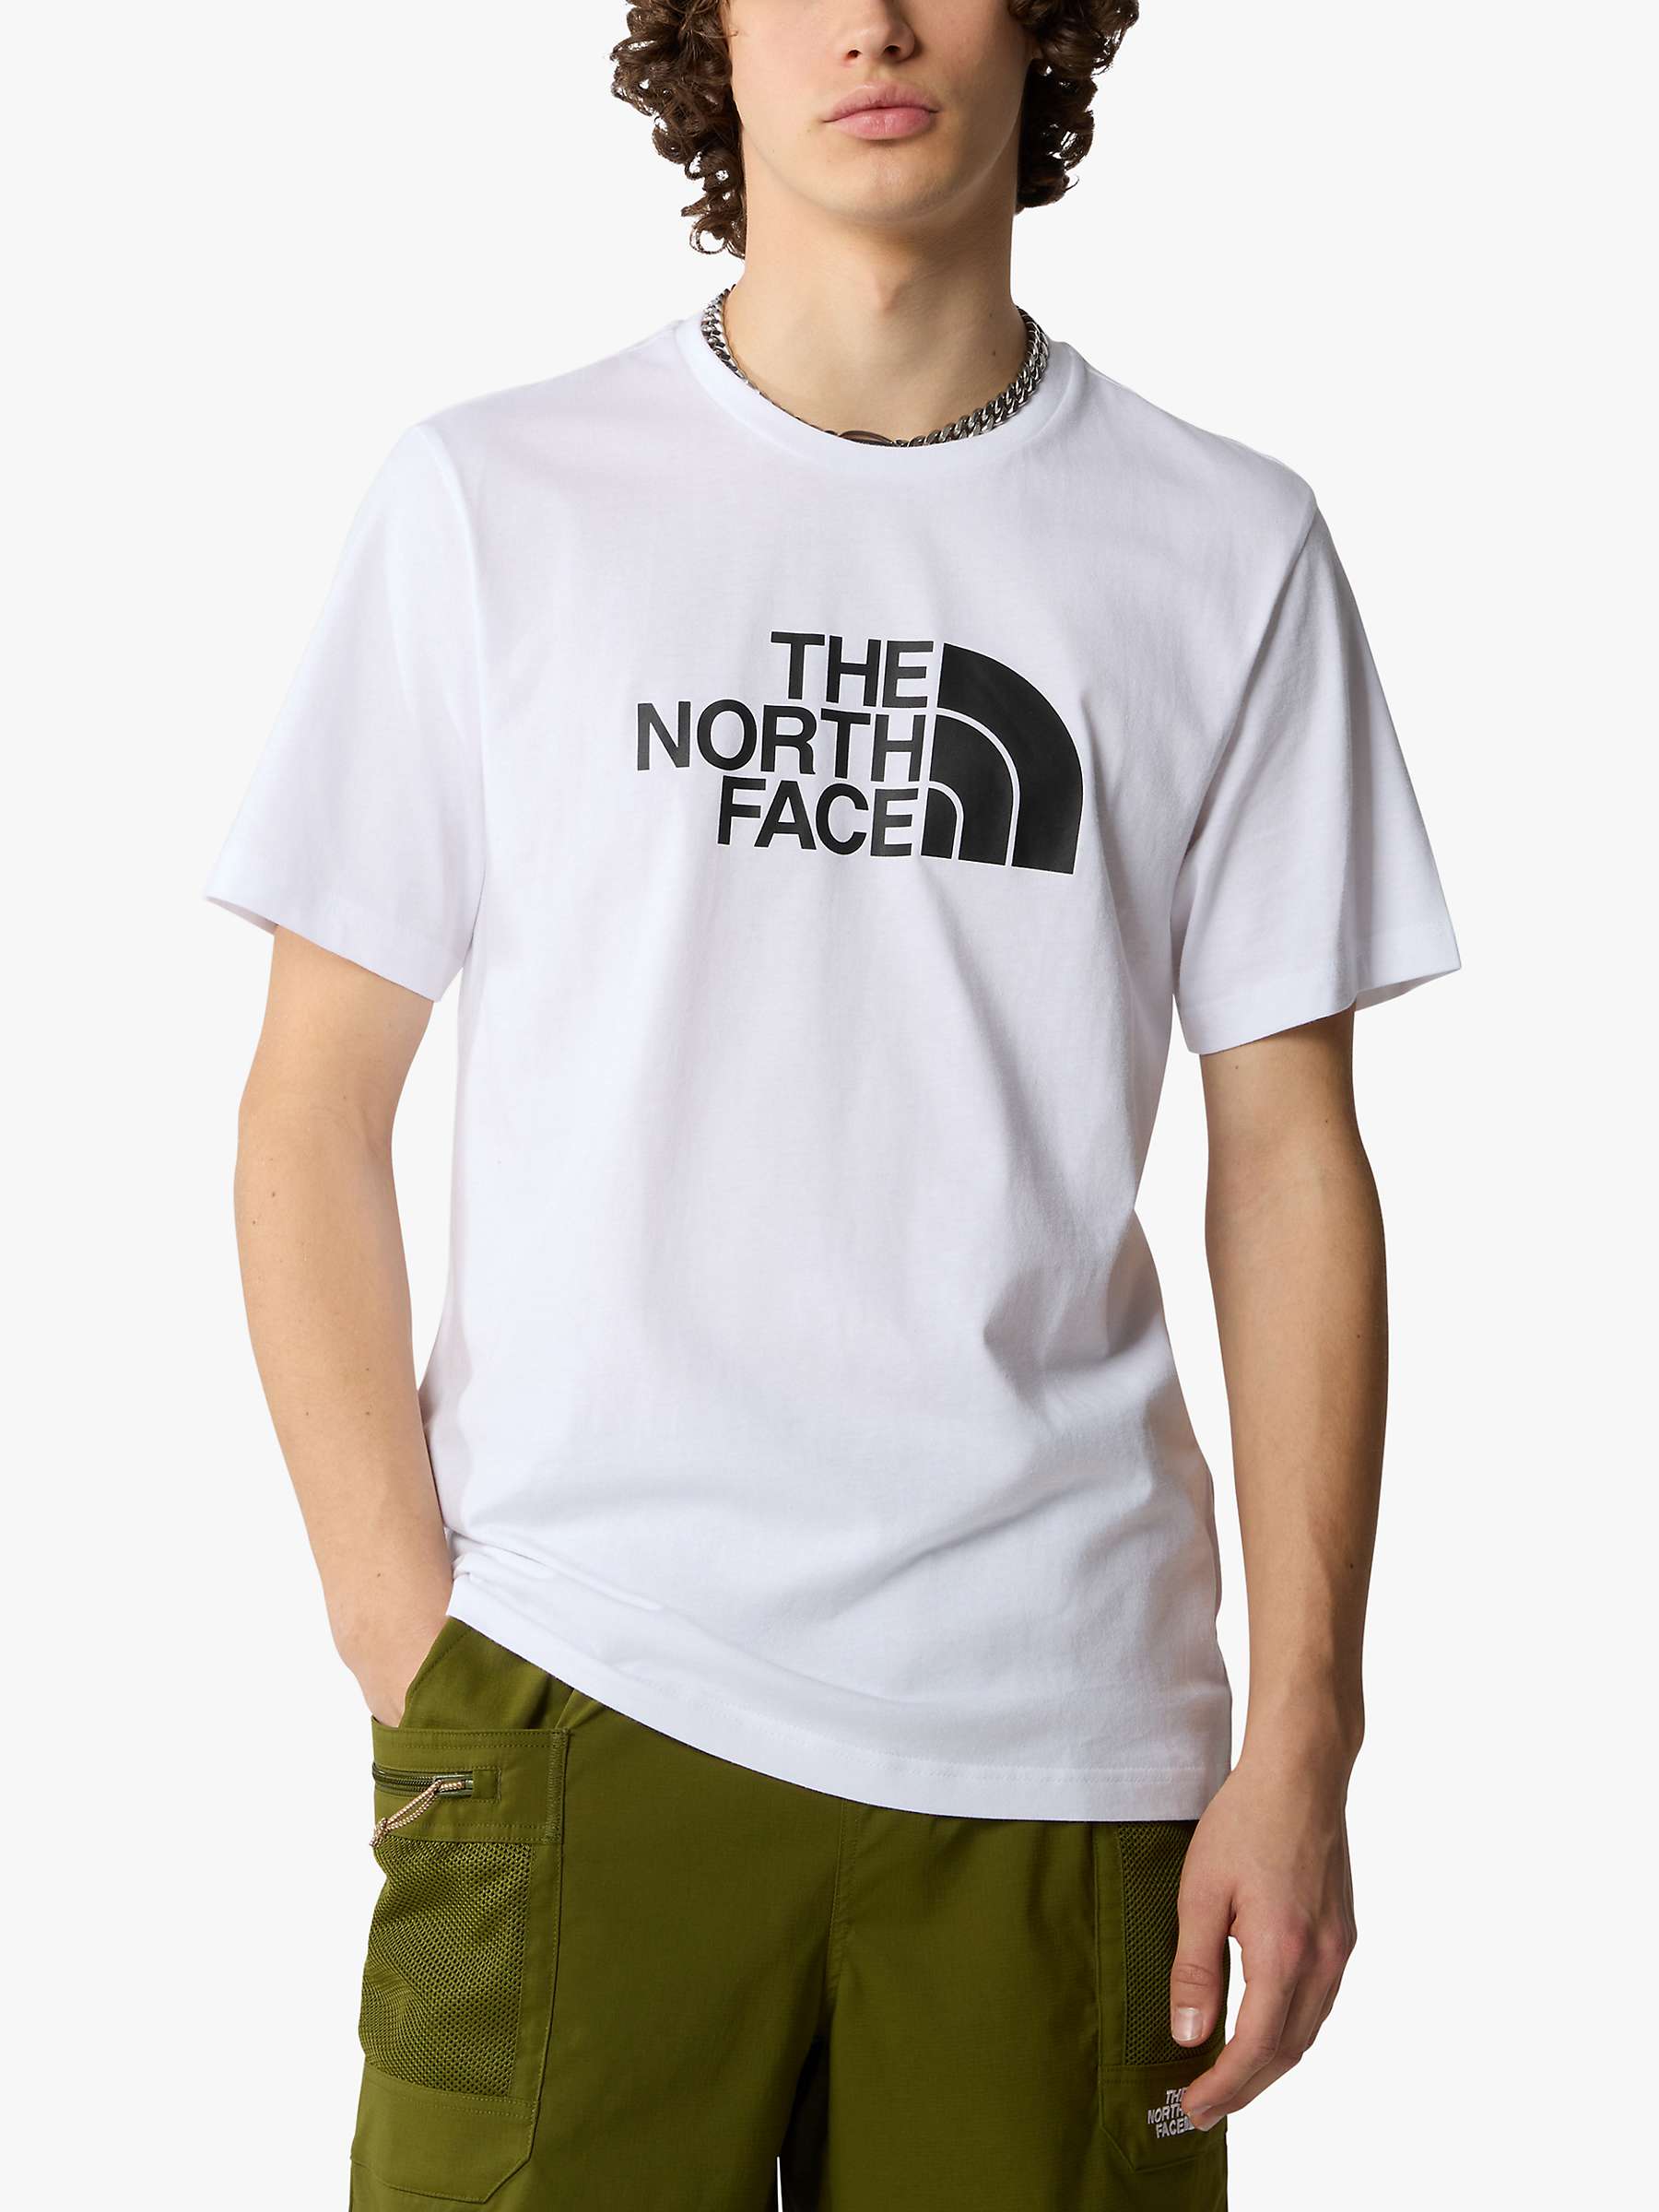 Buy The North Face Easy Short Sleeve T-Shirt, White Online at johnlewis.com